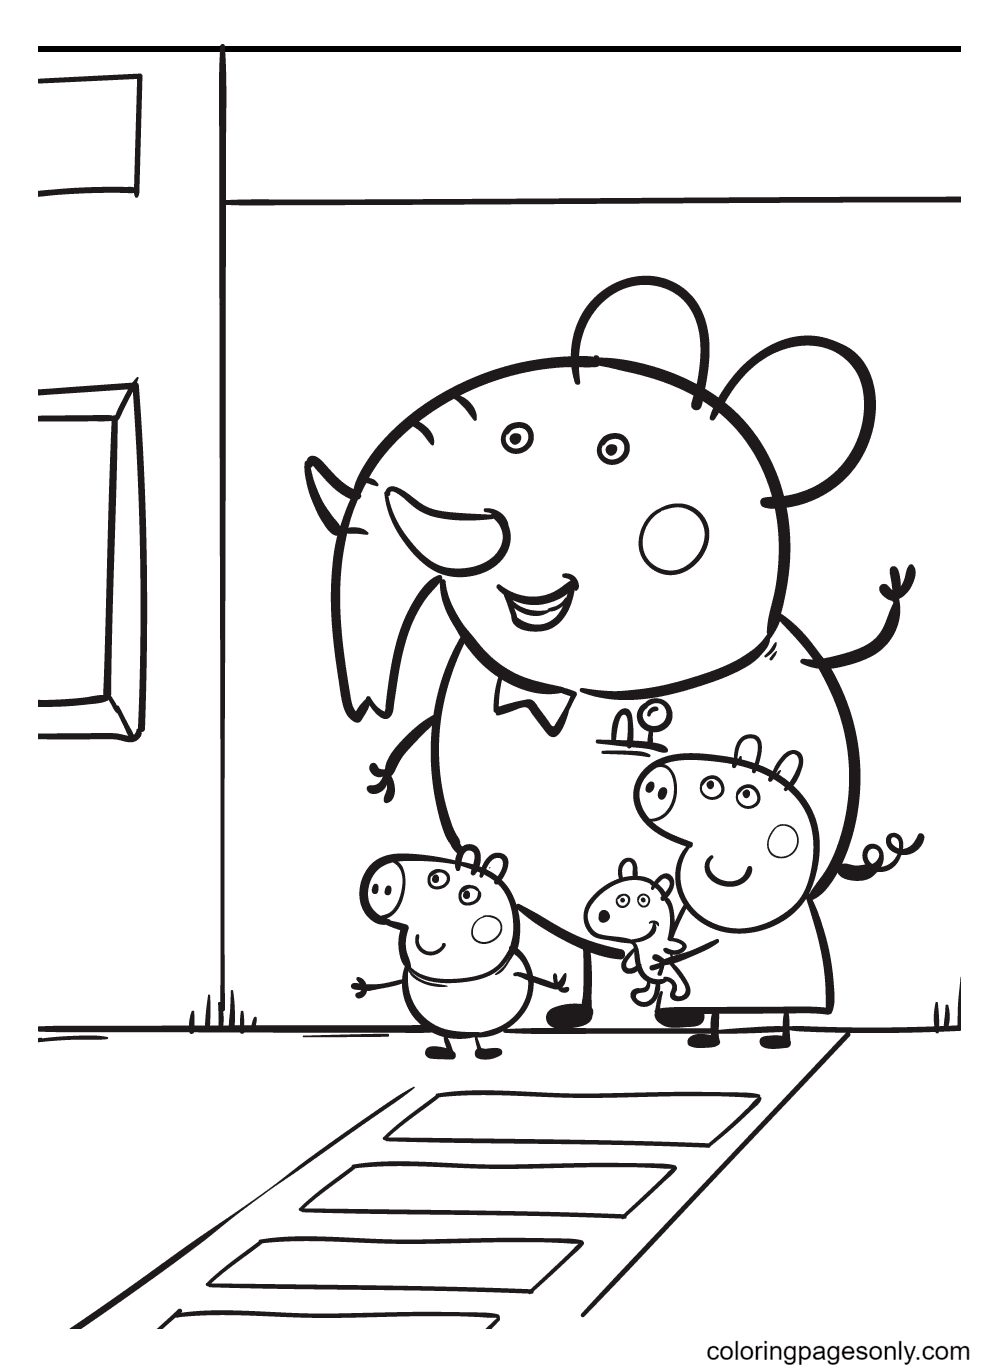 Peppa with George and Emily Elephant Coloring Page